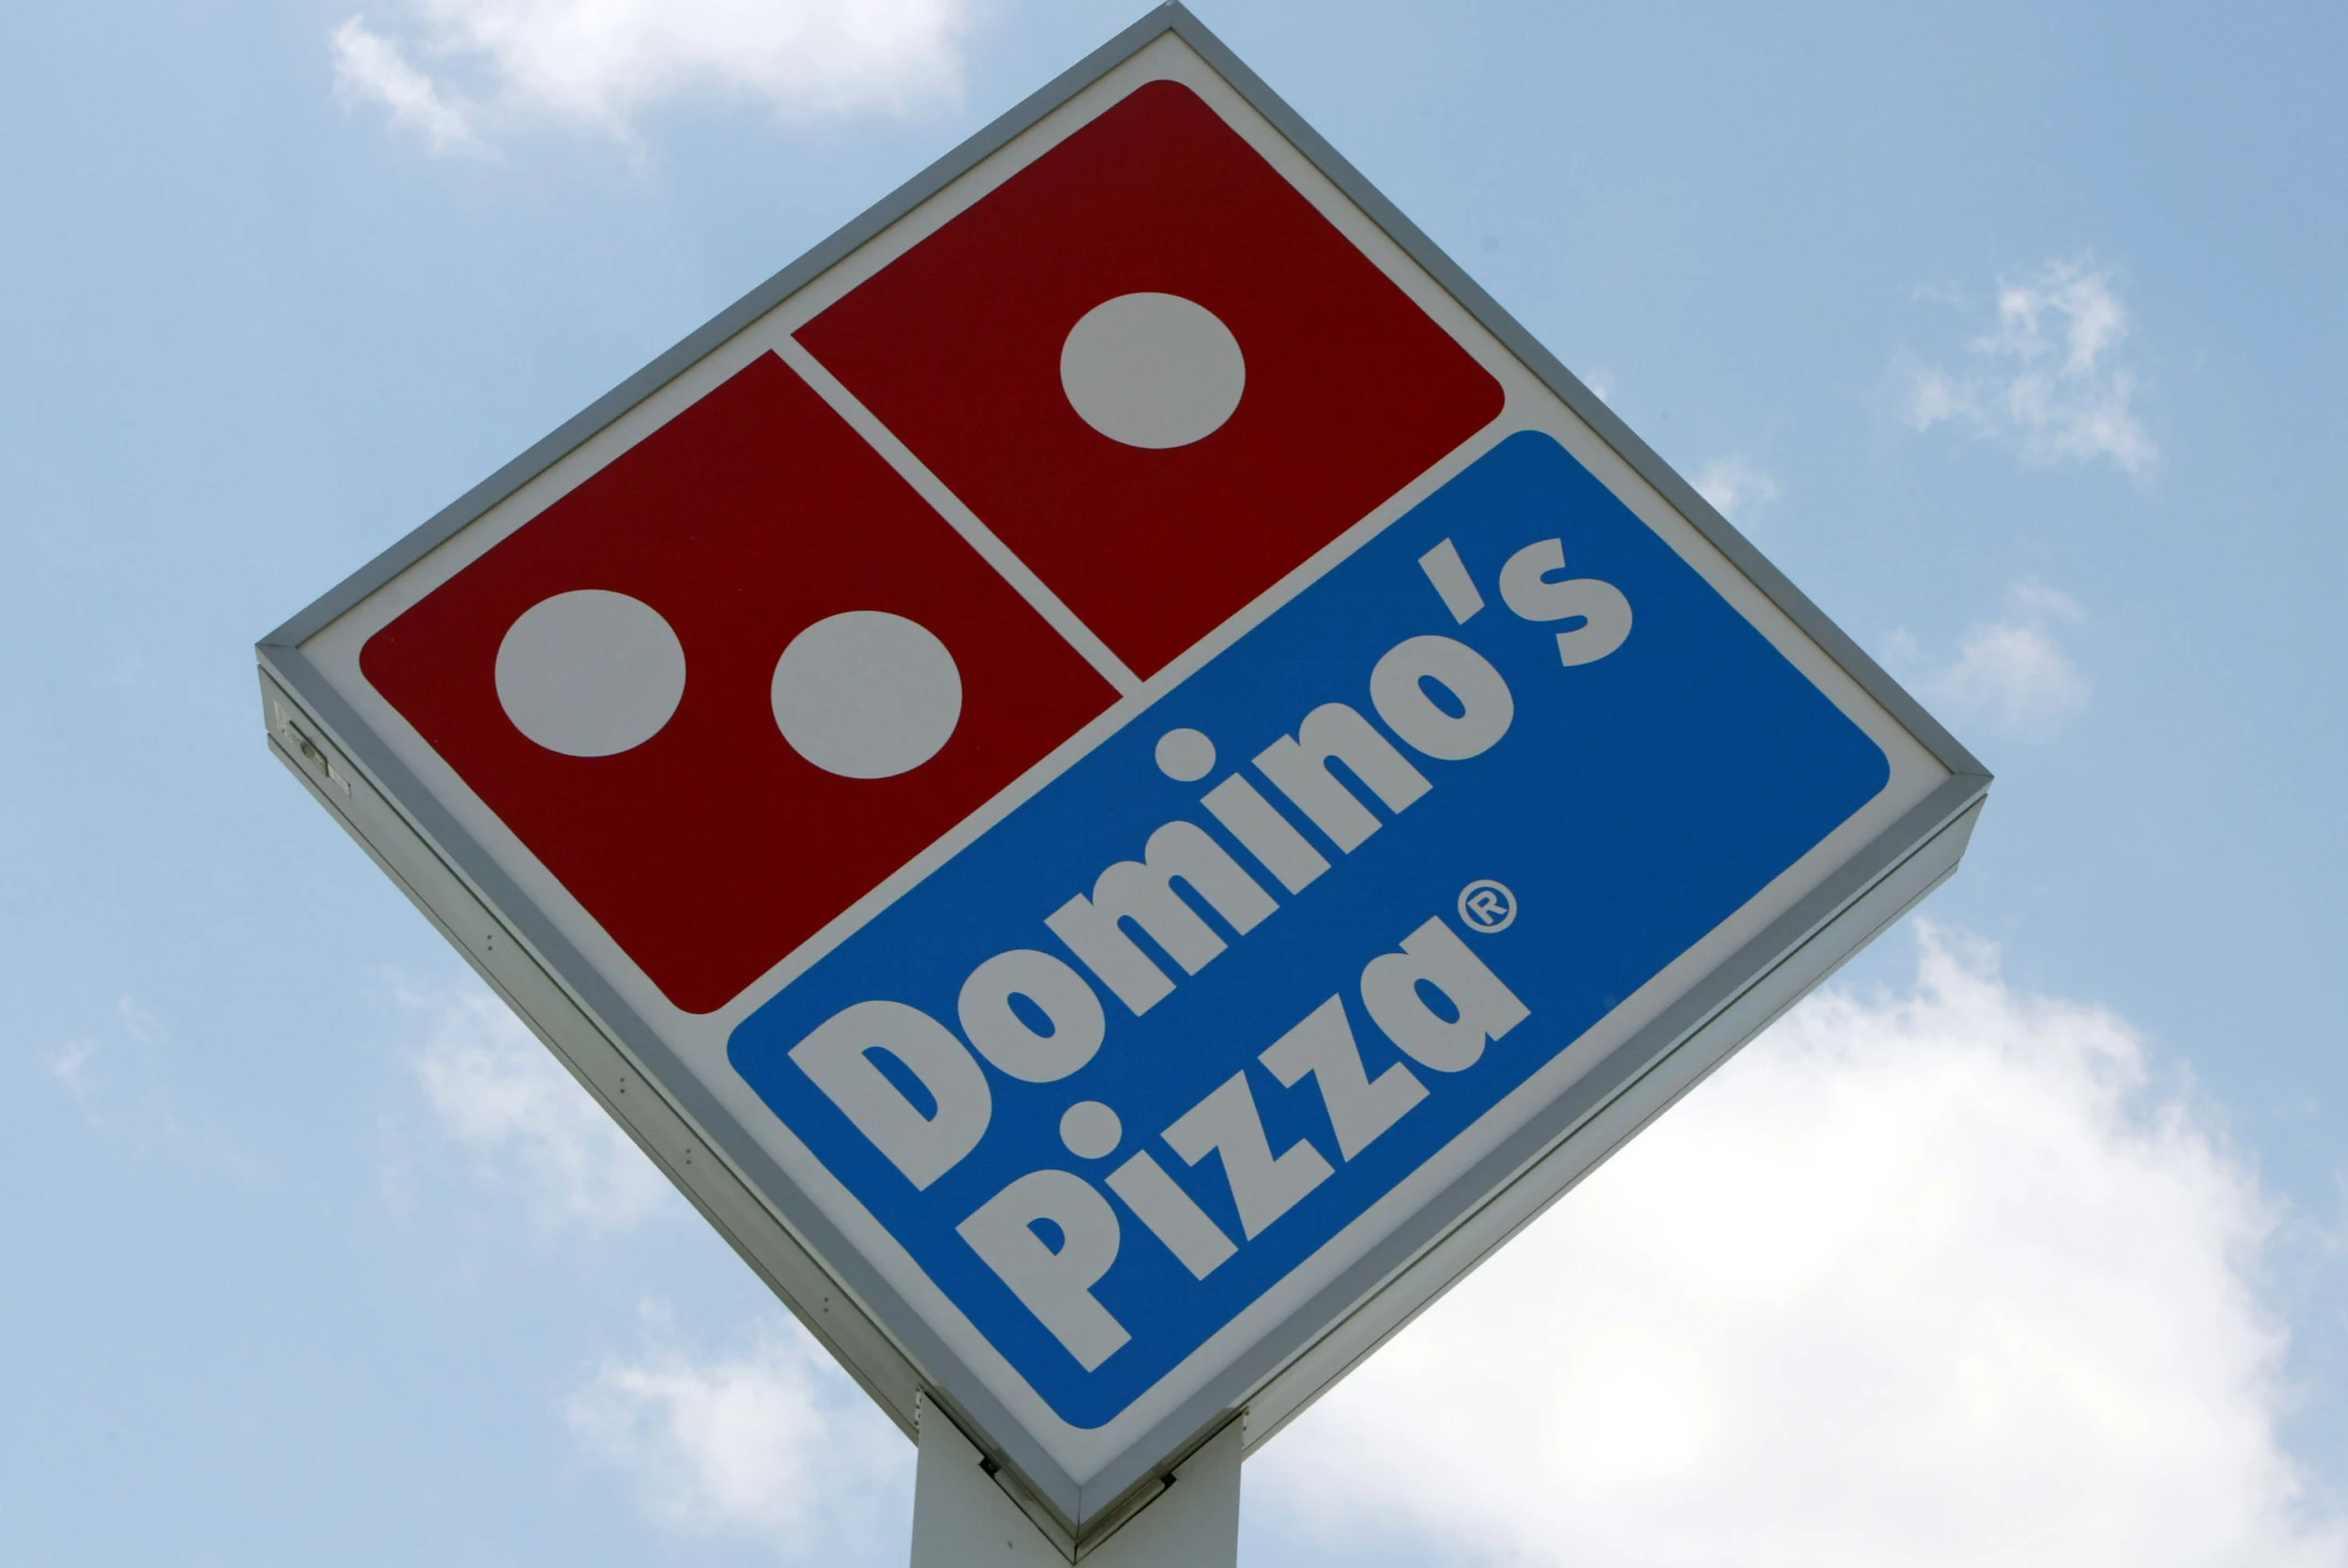 Domino's pizza kicked out of Italy